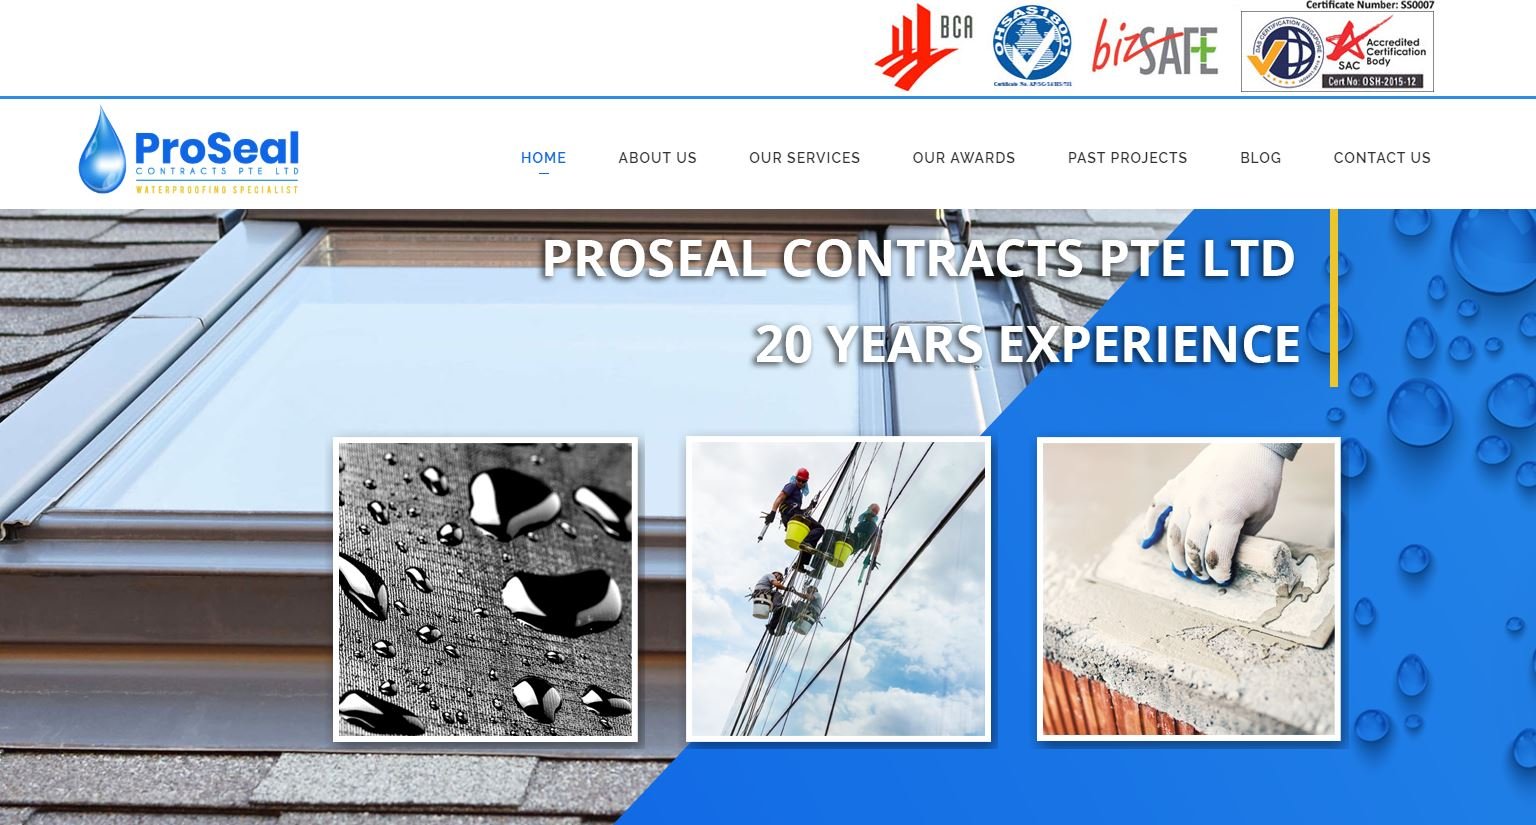 Proseal contracts pte ltd